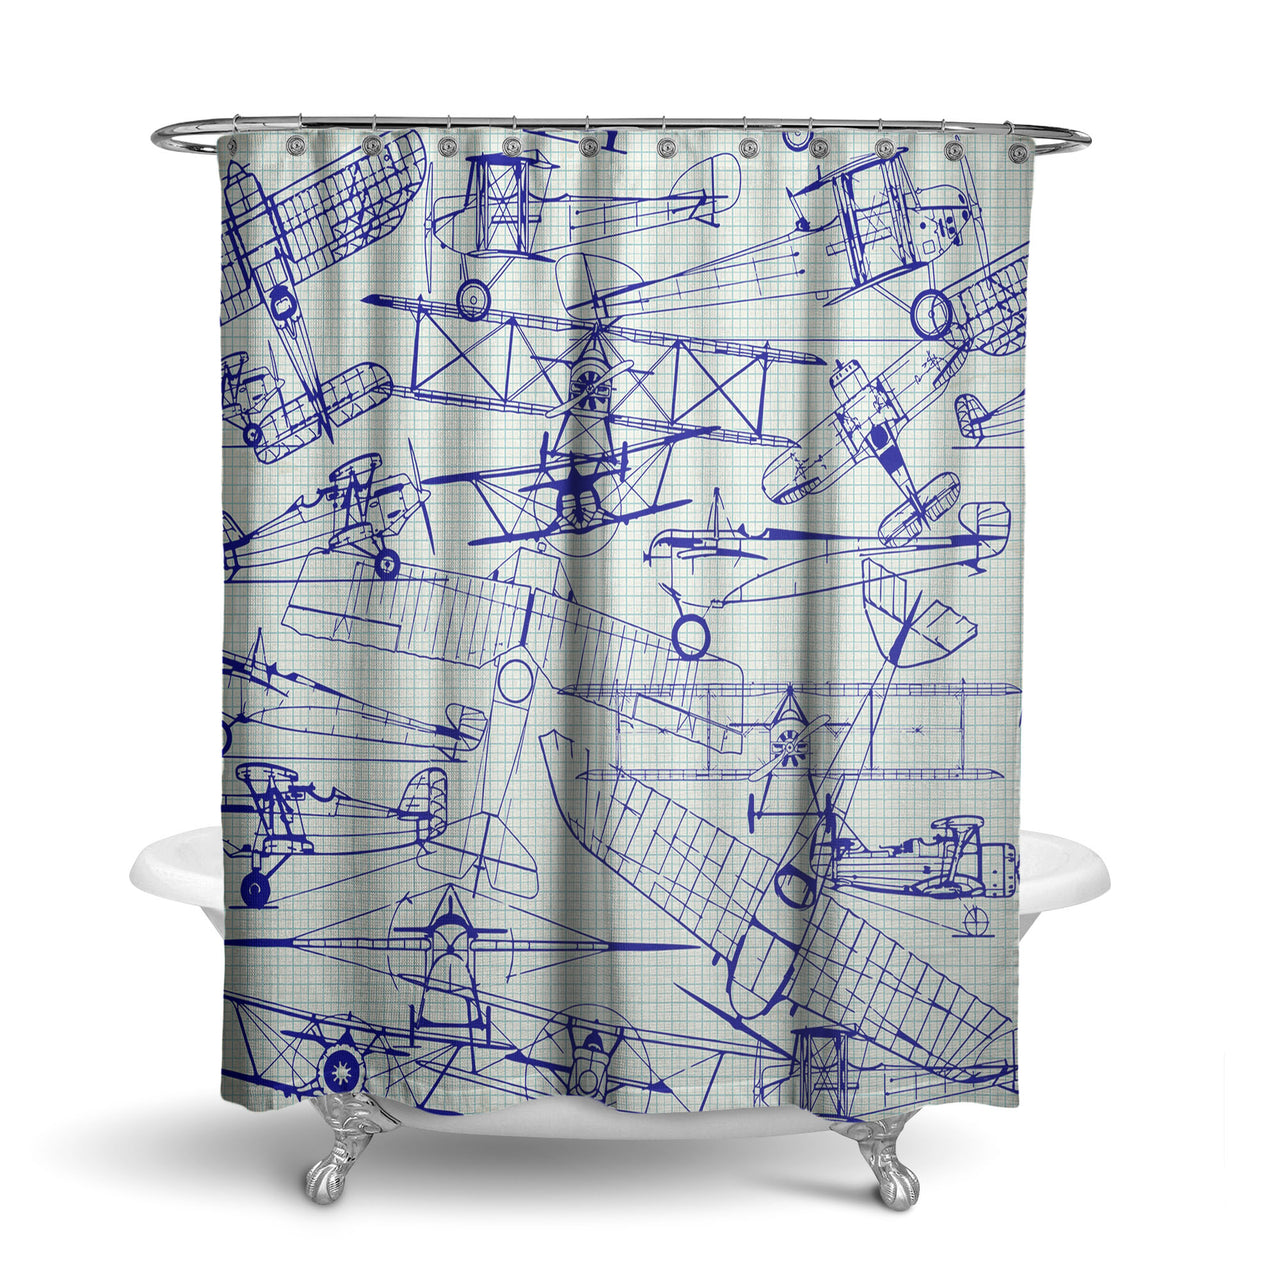 Amazing Drawings of Old Aircrafts Designed Shower Curtains